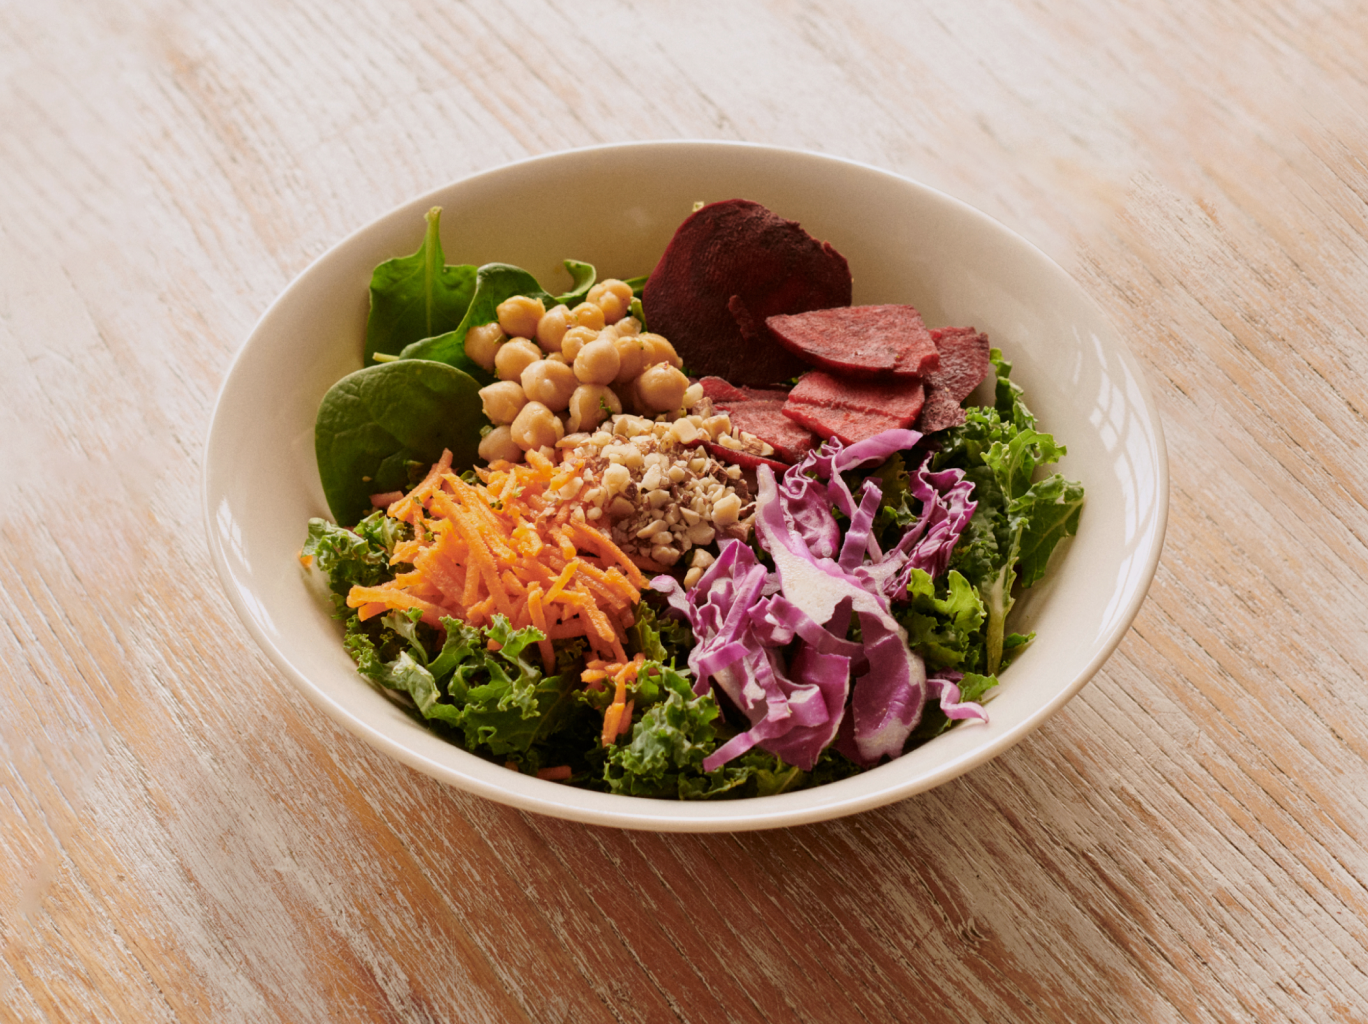 A salad that fully embodies health and wellness made of spinach, kale, cabbage, chickpeas, carrots, and beets.